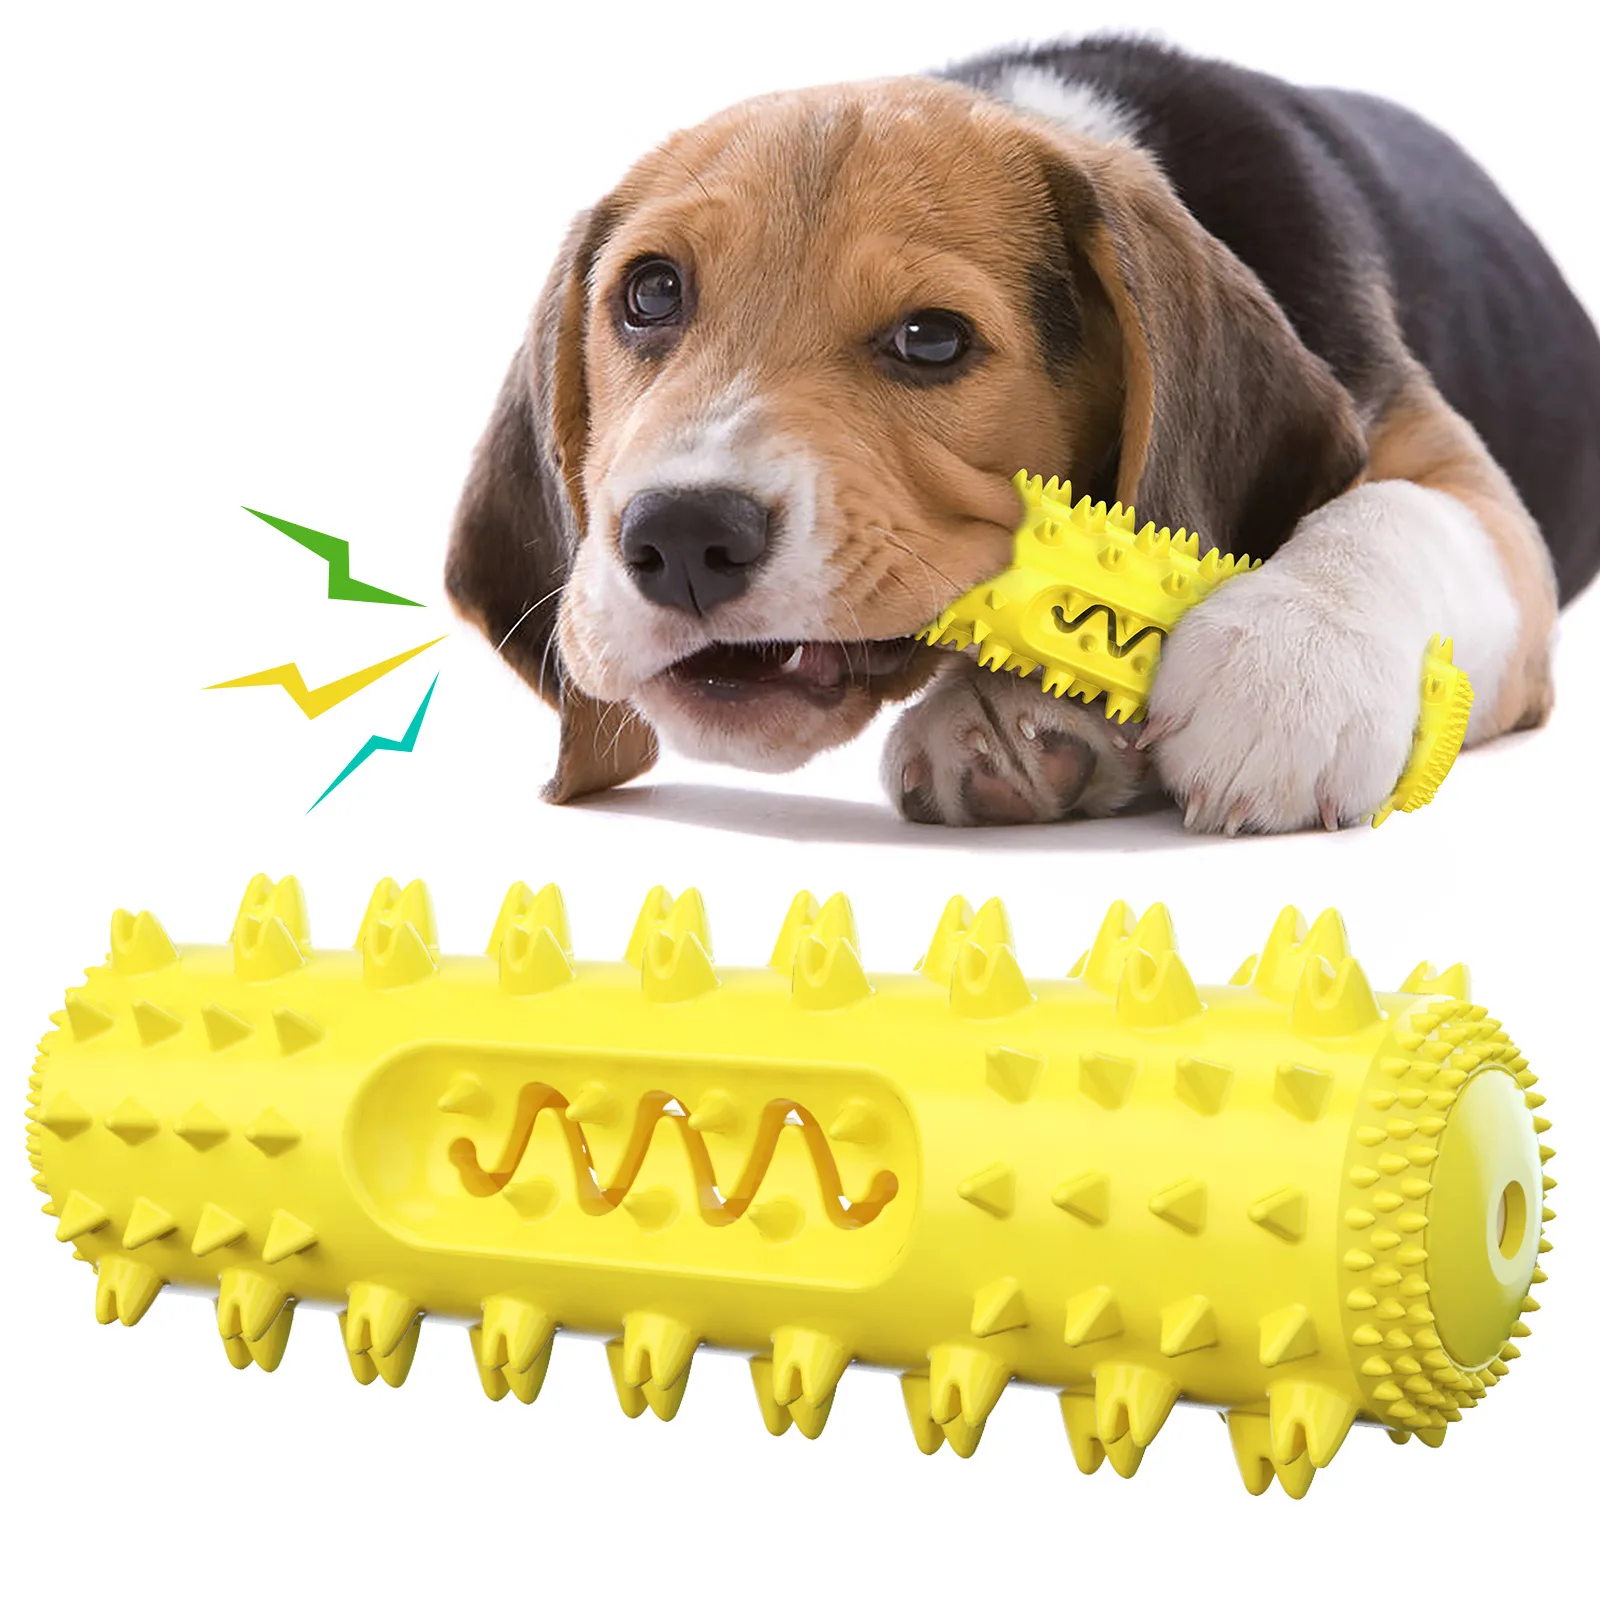 

Amazon Hot selling Indestructible Rubber Squeaky Dental Care Pet Toys Toothbrush Aggressive Dog Chew Toys Tough Dog Toy, Customzied